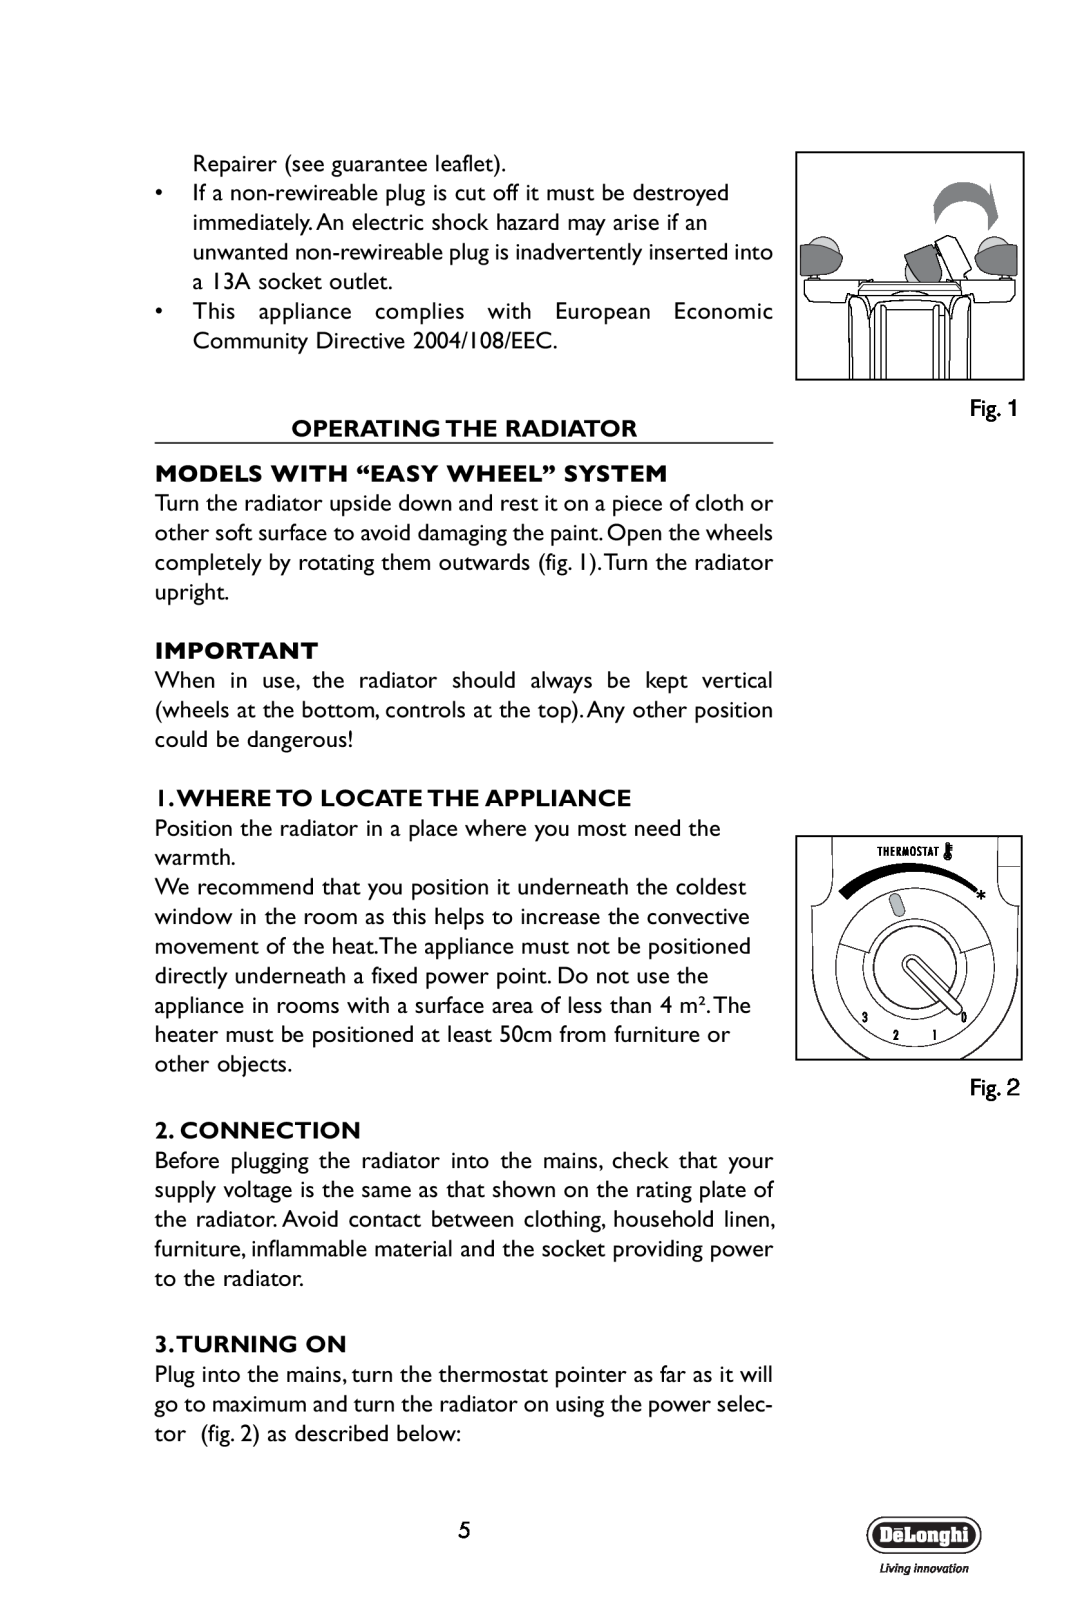 DeLonghi V550715 manual Operating The Radiator, Models With “Easy Wheel” System, Where To Locate The Appliance, Connection 